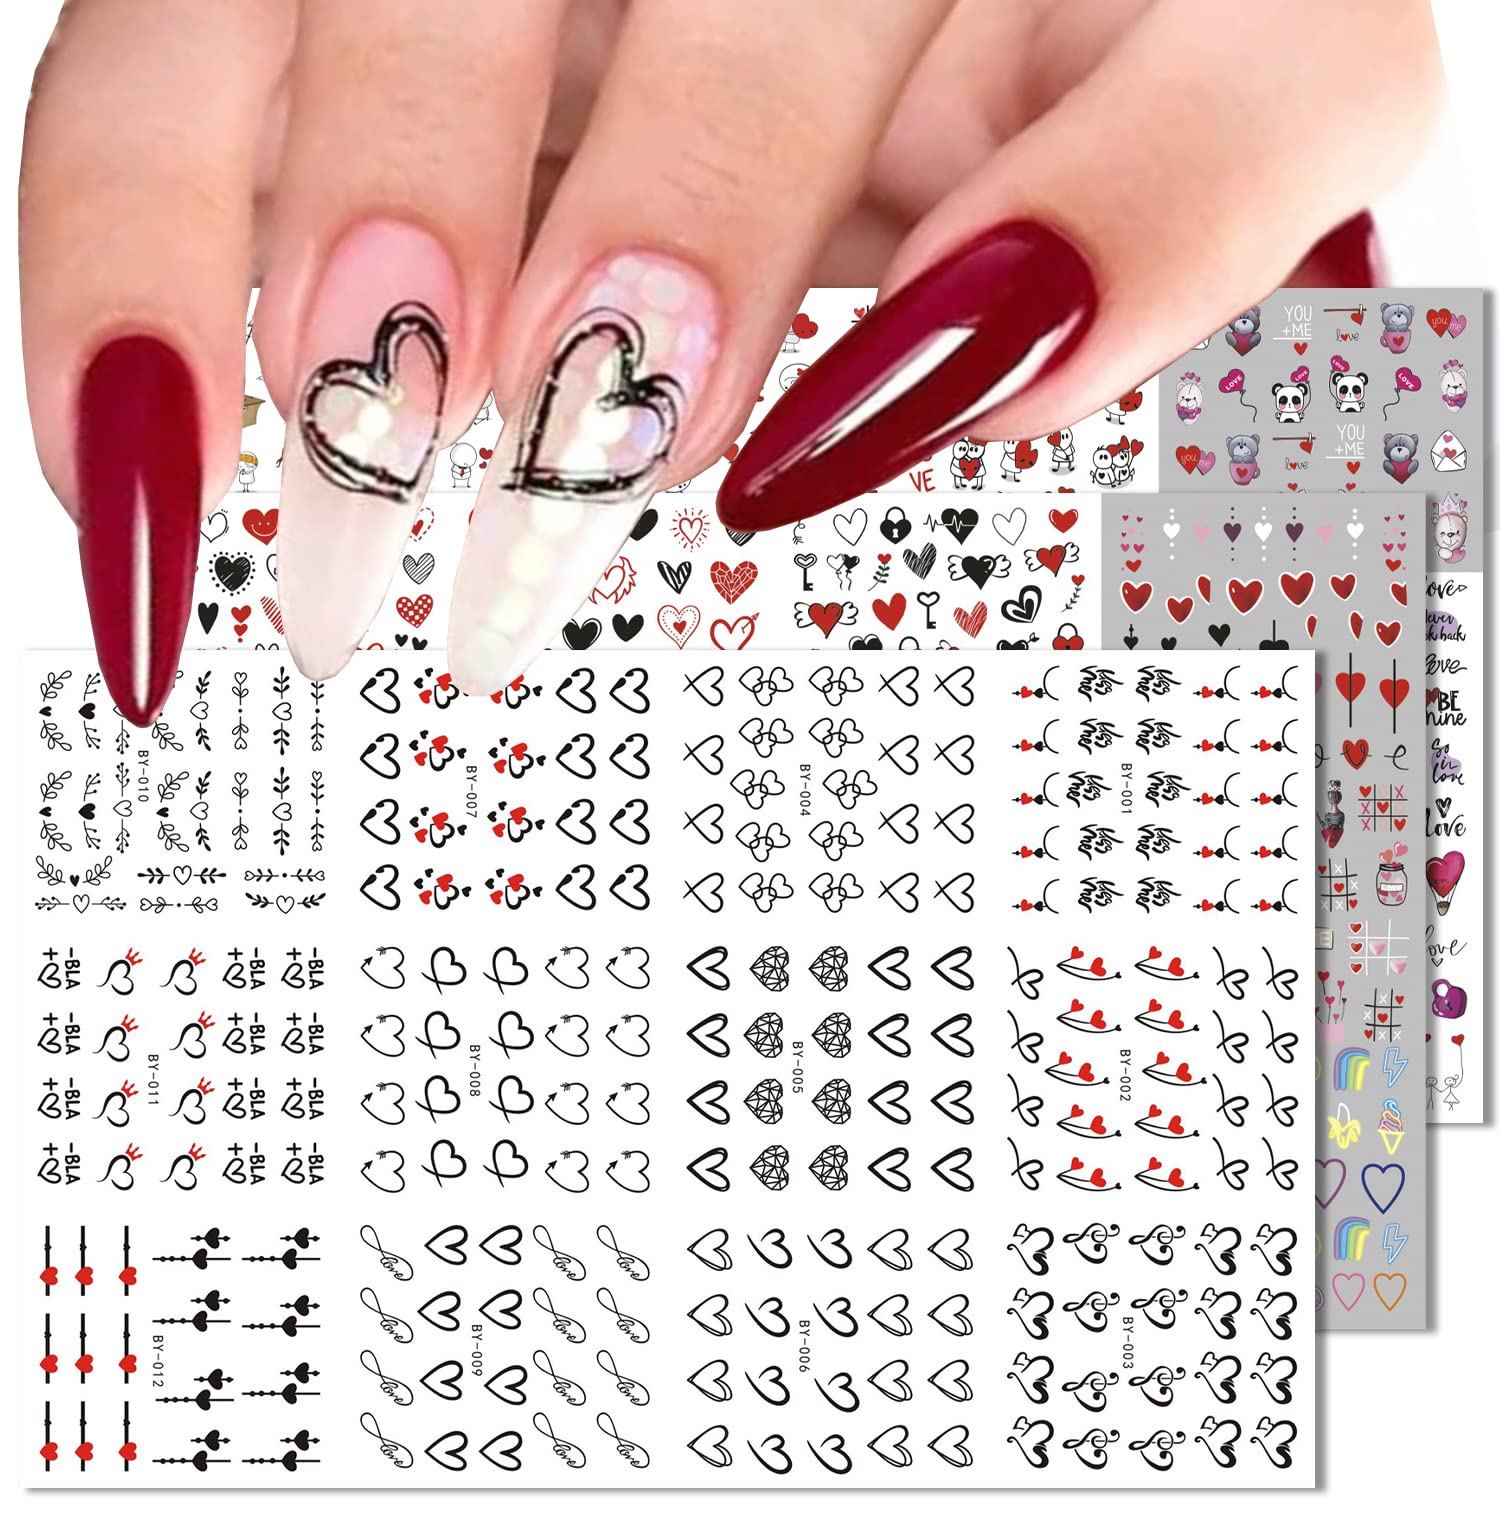 36Pcs Valentines Day Nail Art Stickers Decals Heart Cartoon 3D  Self-Adhesive Nail Decorations Cute Comic Love Nail Sticker Red Black Heart  Designs Nail Supplies Valentines Nail Accessories